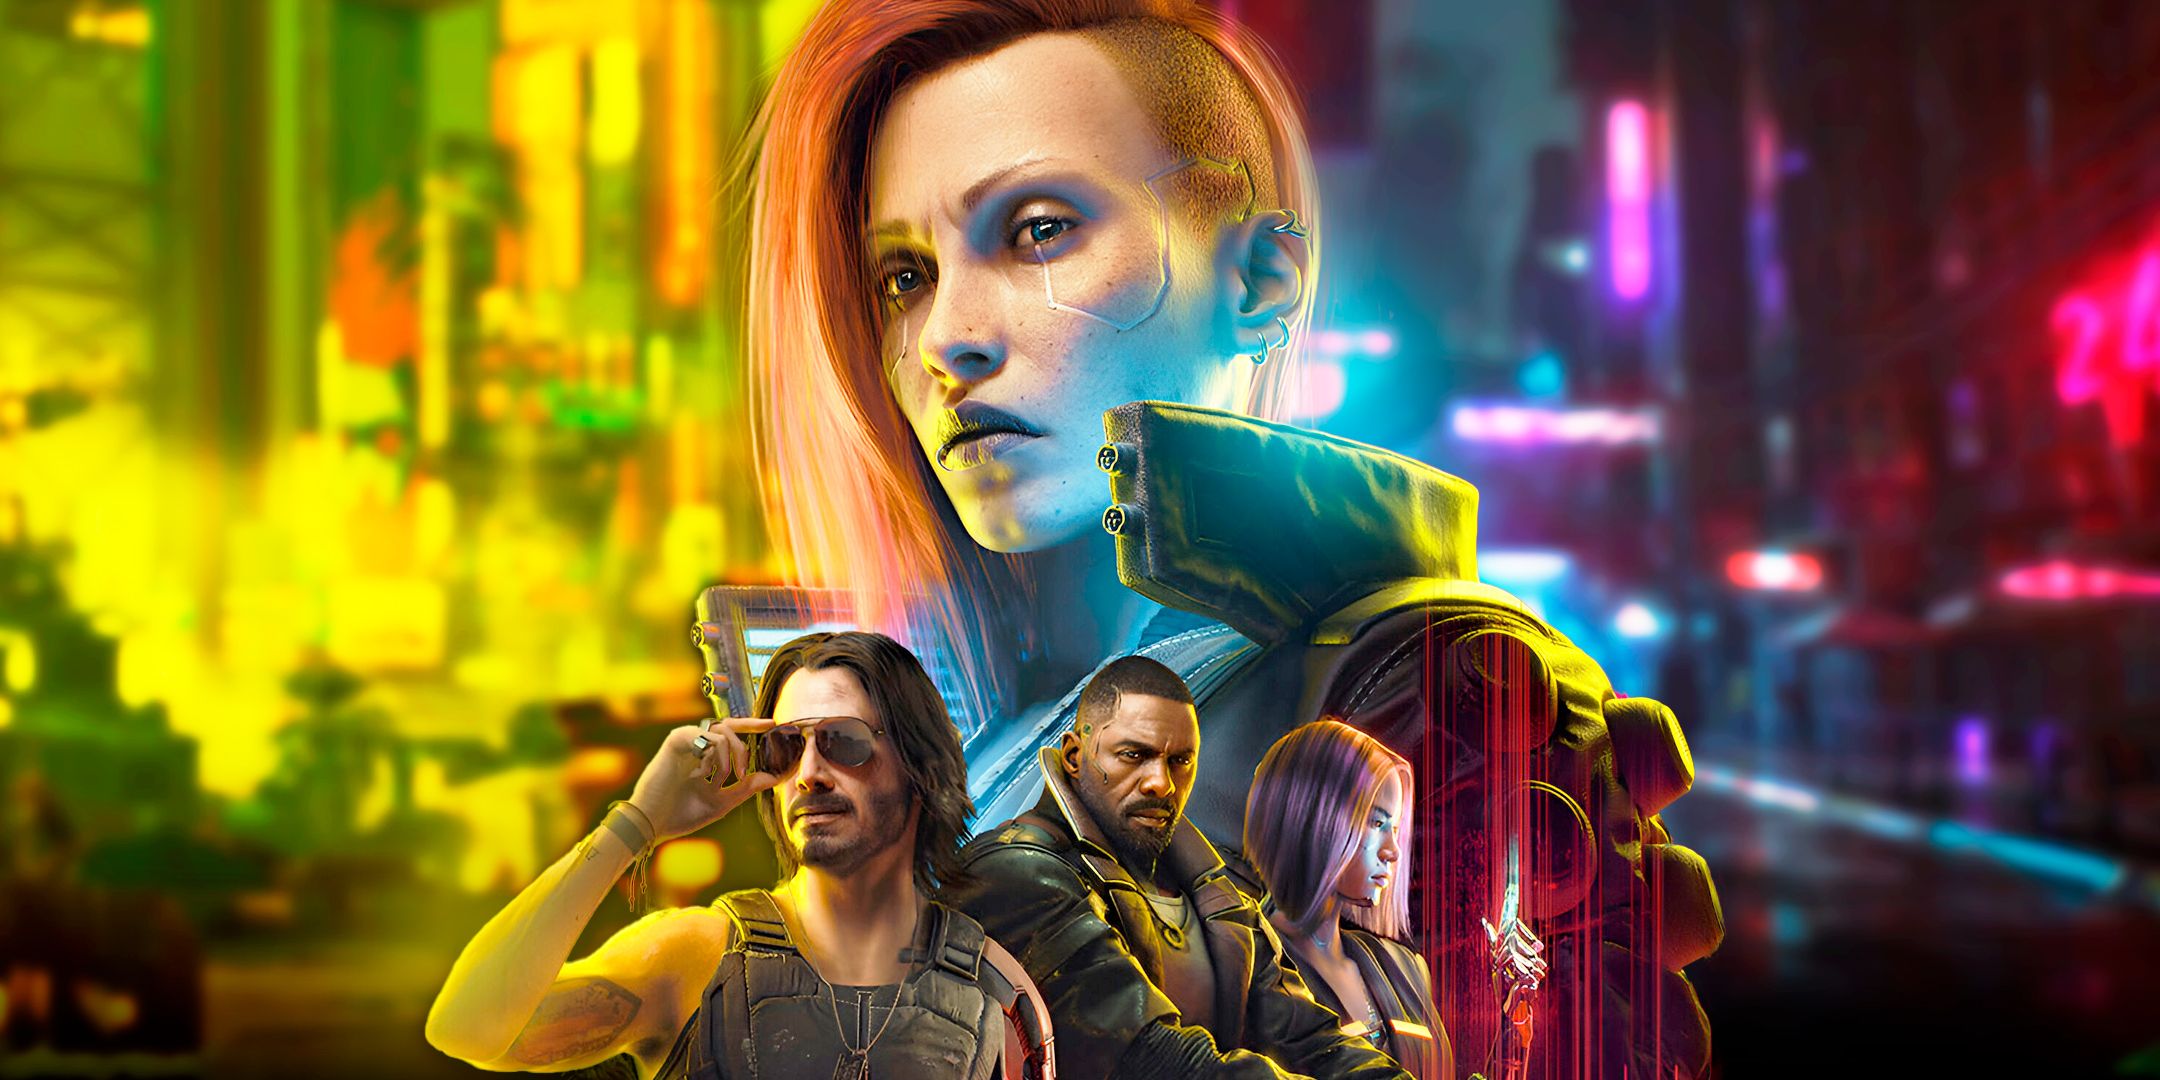 cyberpunk-2077-project-orion-edgerunners-lore-references